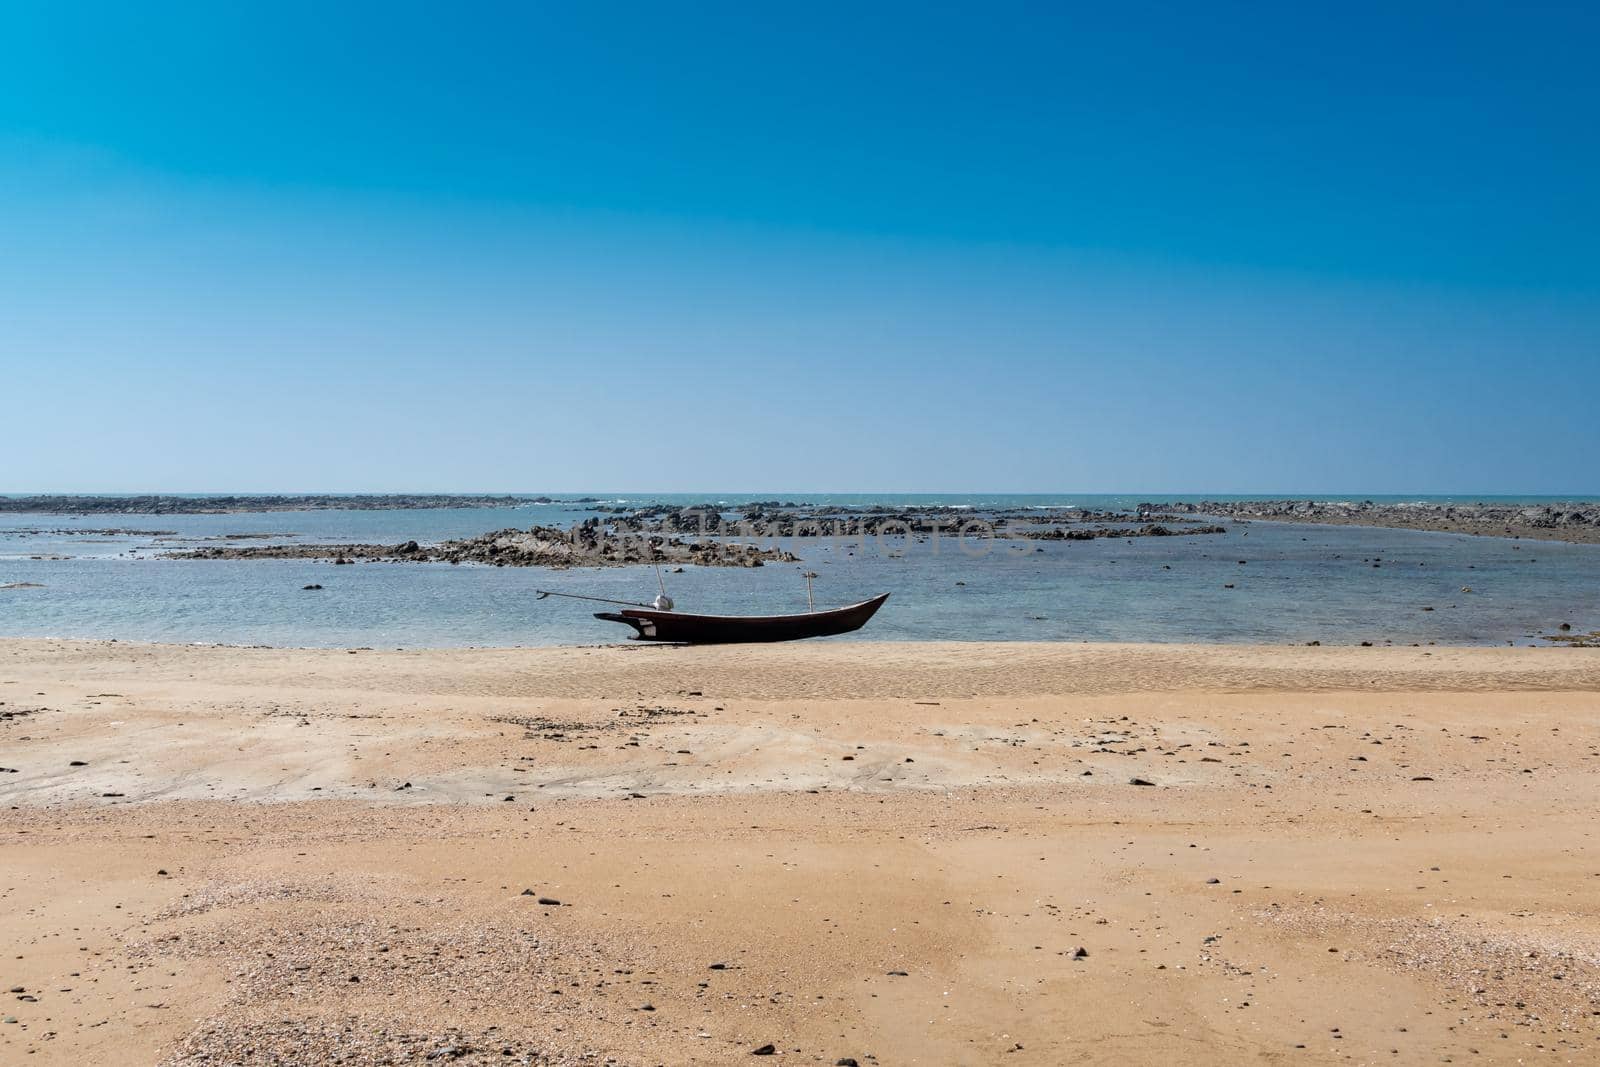 Longboat on beach with rocks in background by imagesbykenny